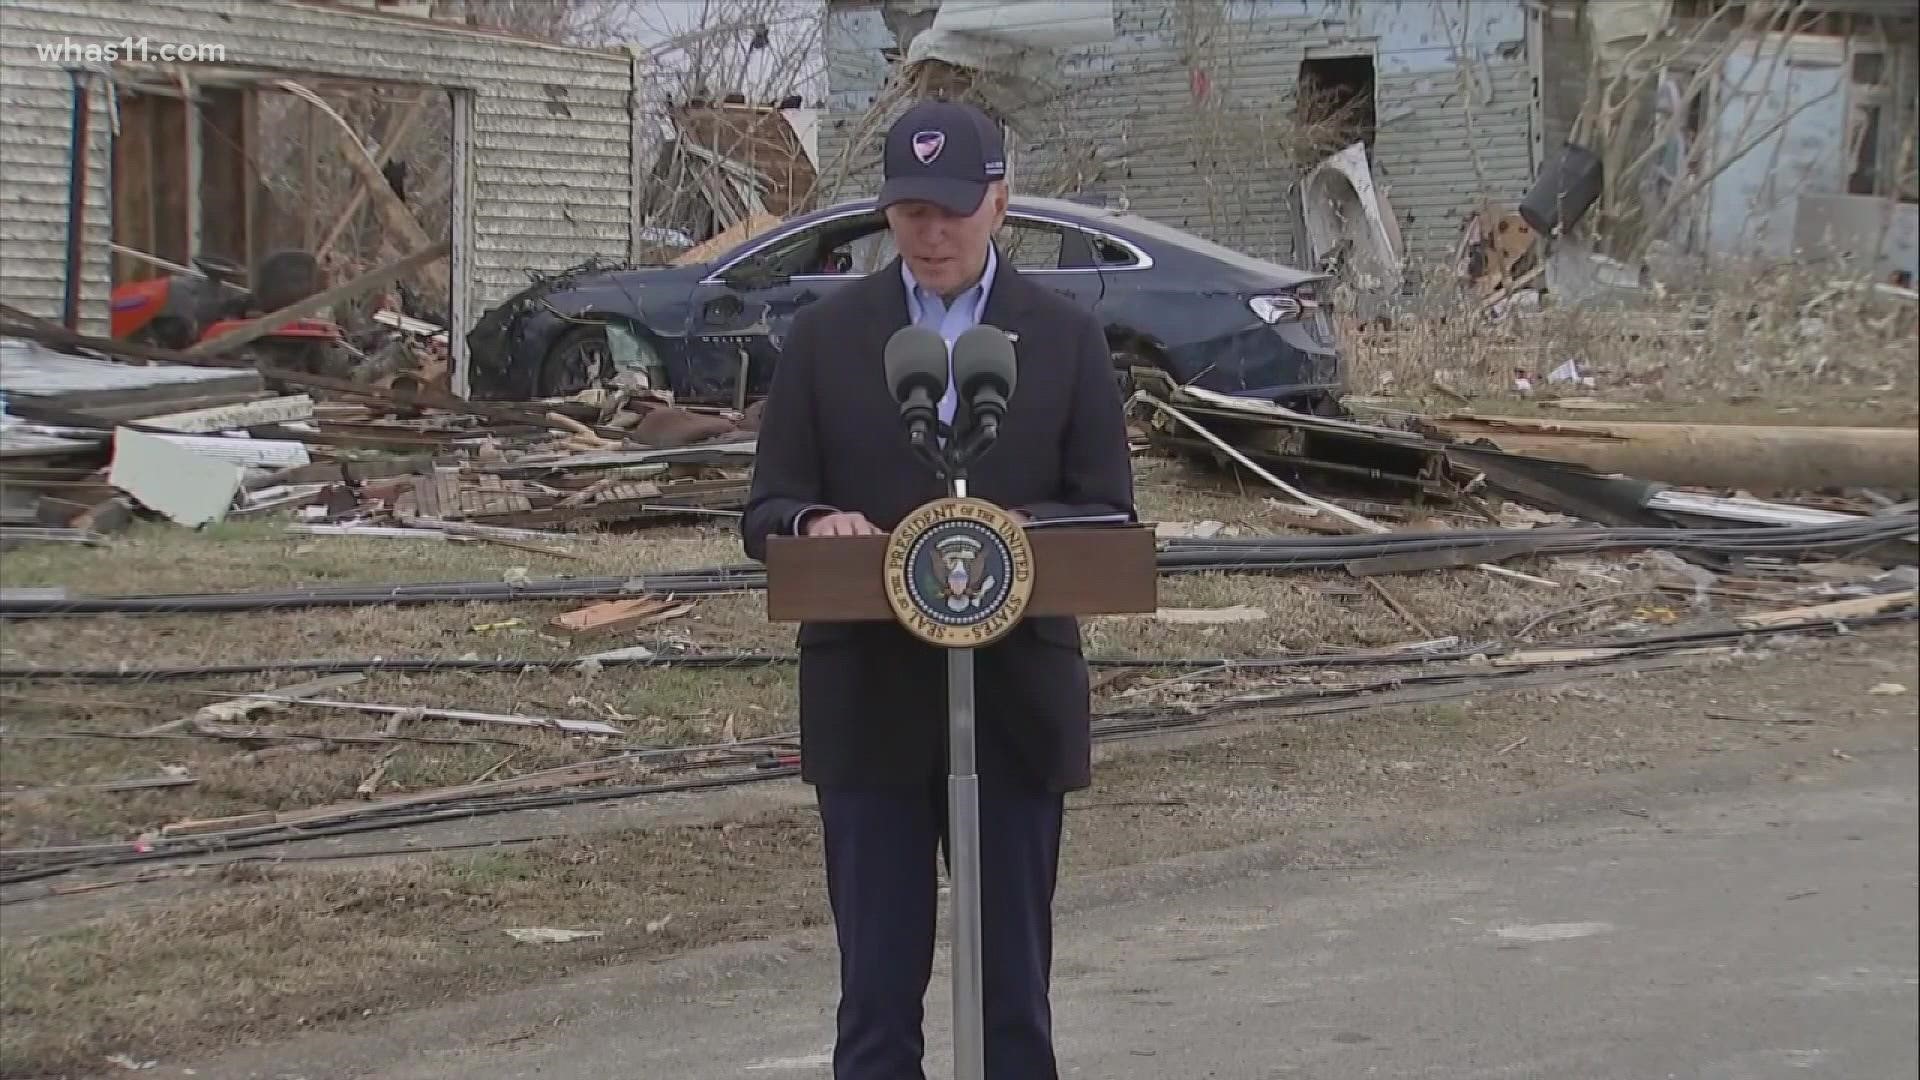 Biden announced the federal government will be paying for 100% of eligible expenses incurred following the tornado.